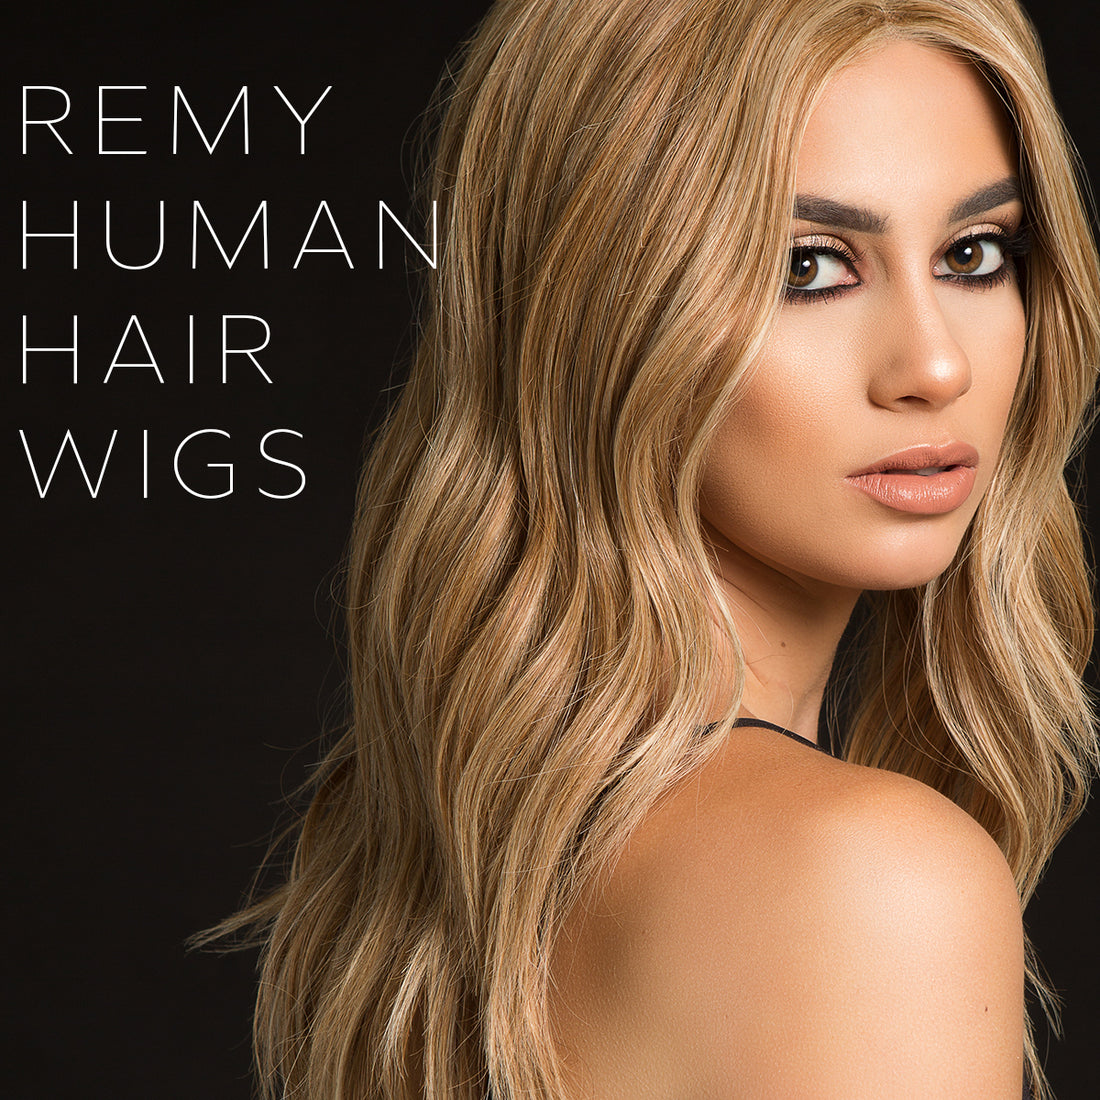 How to Maintain Remy Human Hair Wigs